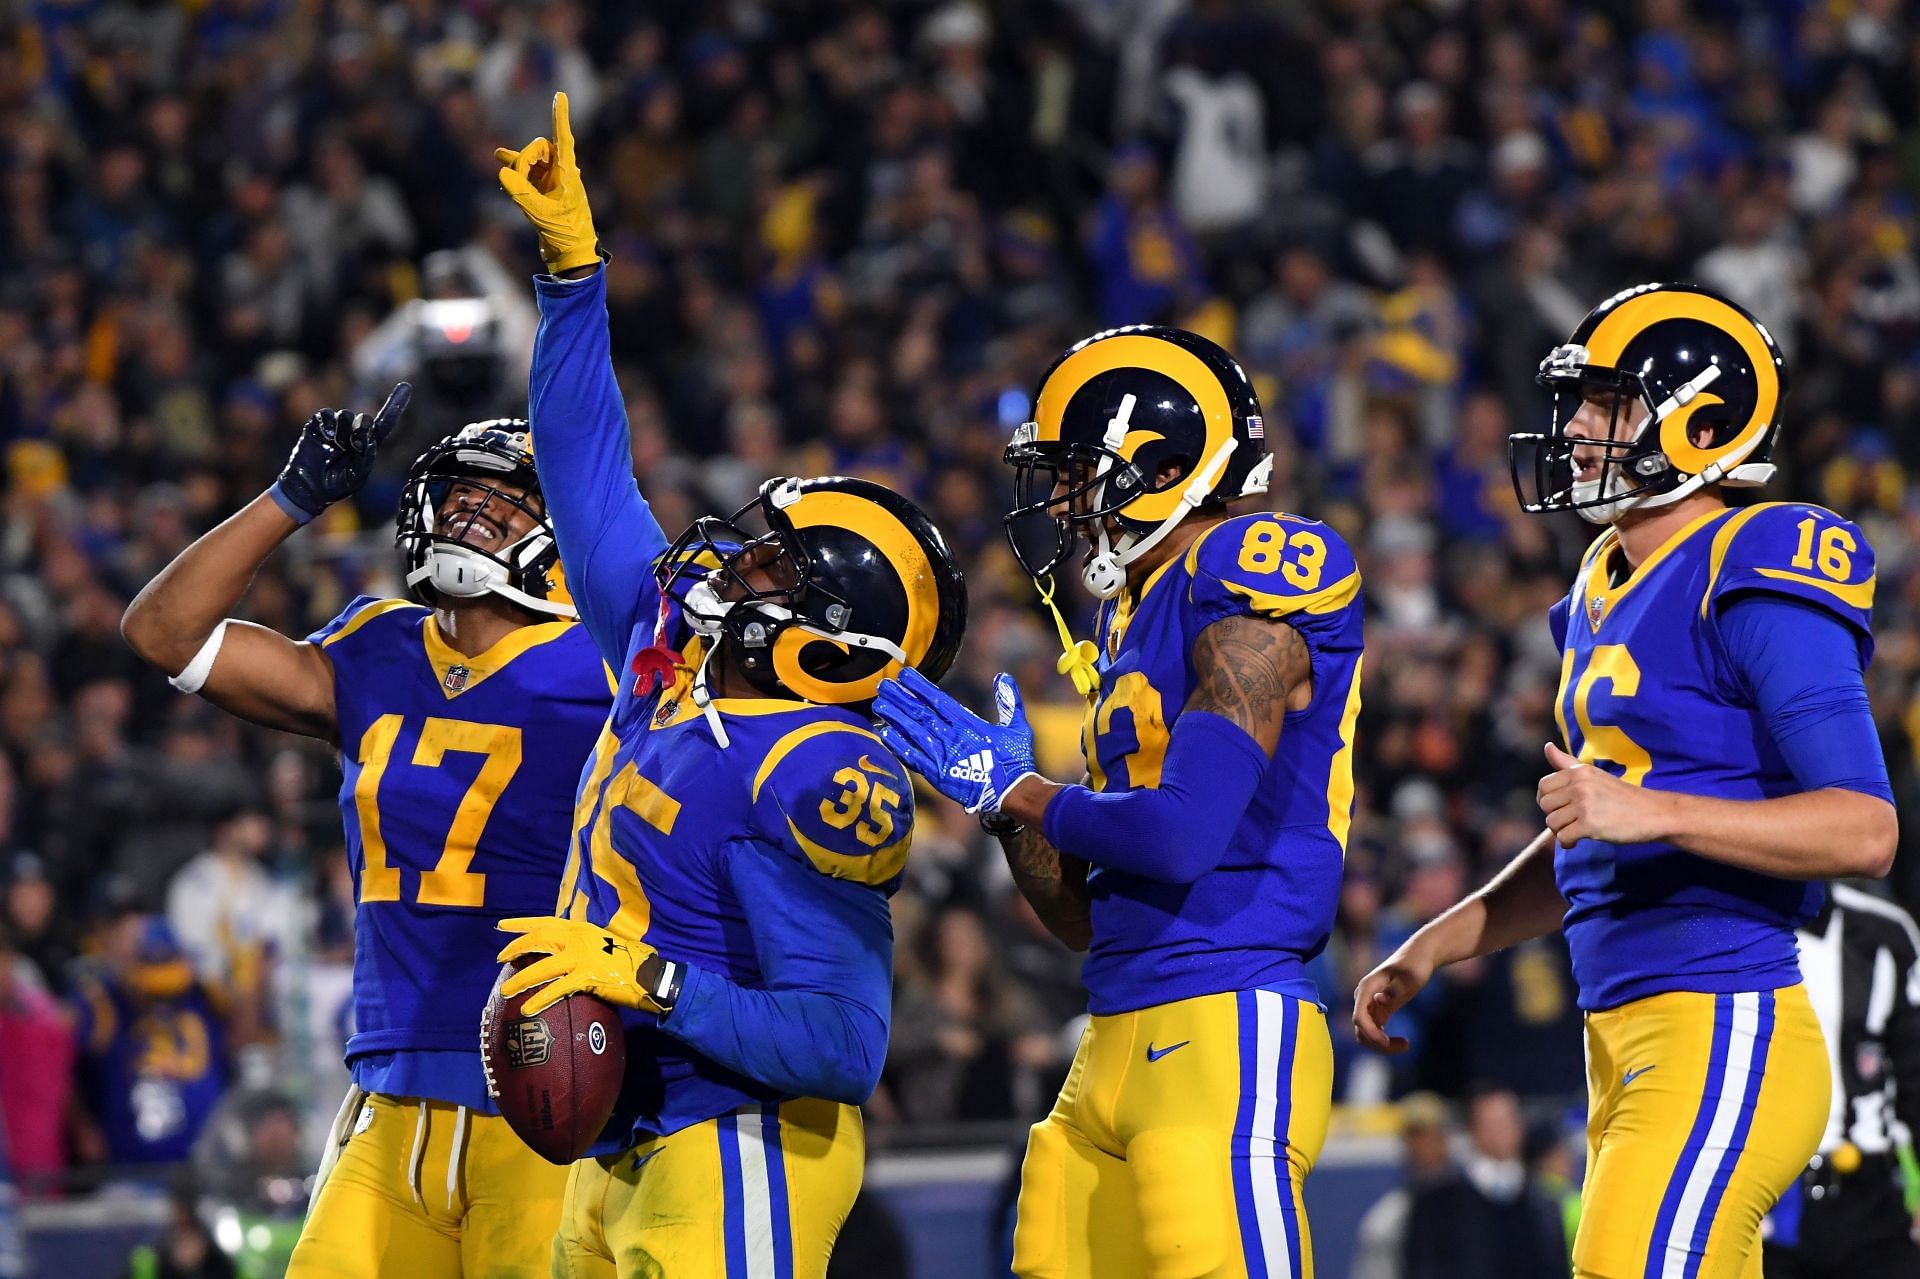 The Los Angeles Rams aime to run it back in 2022